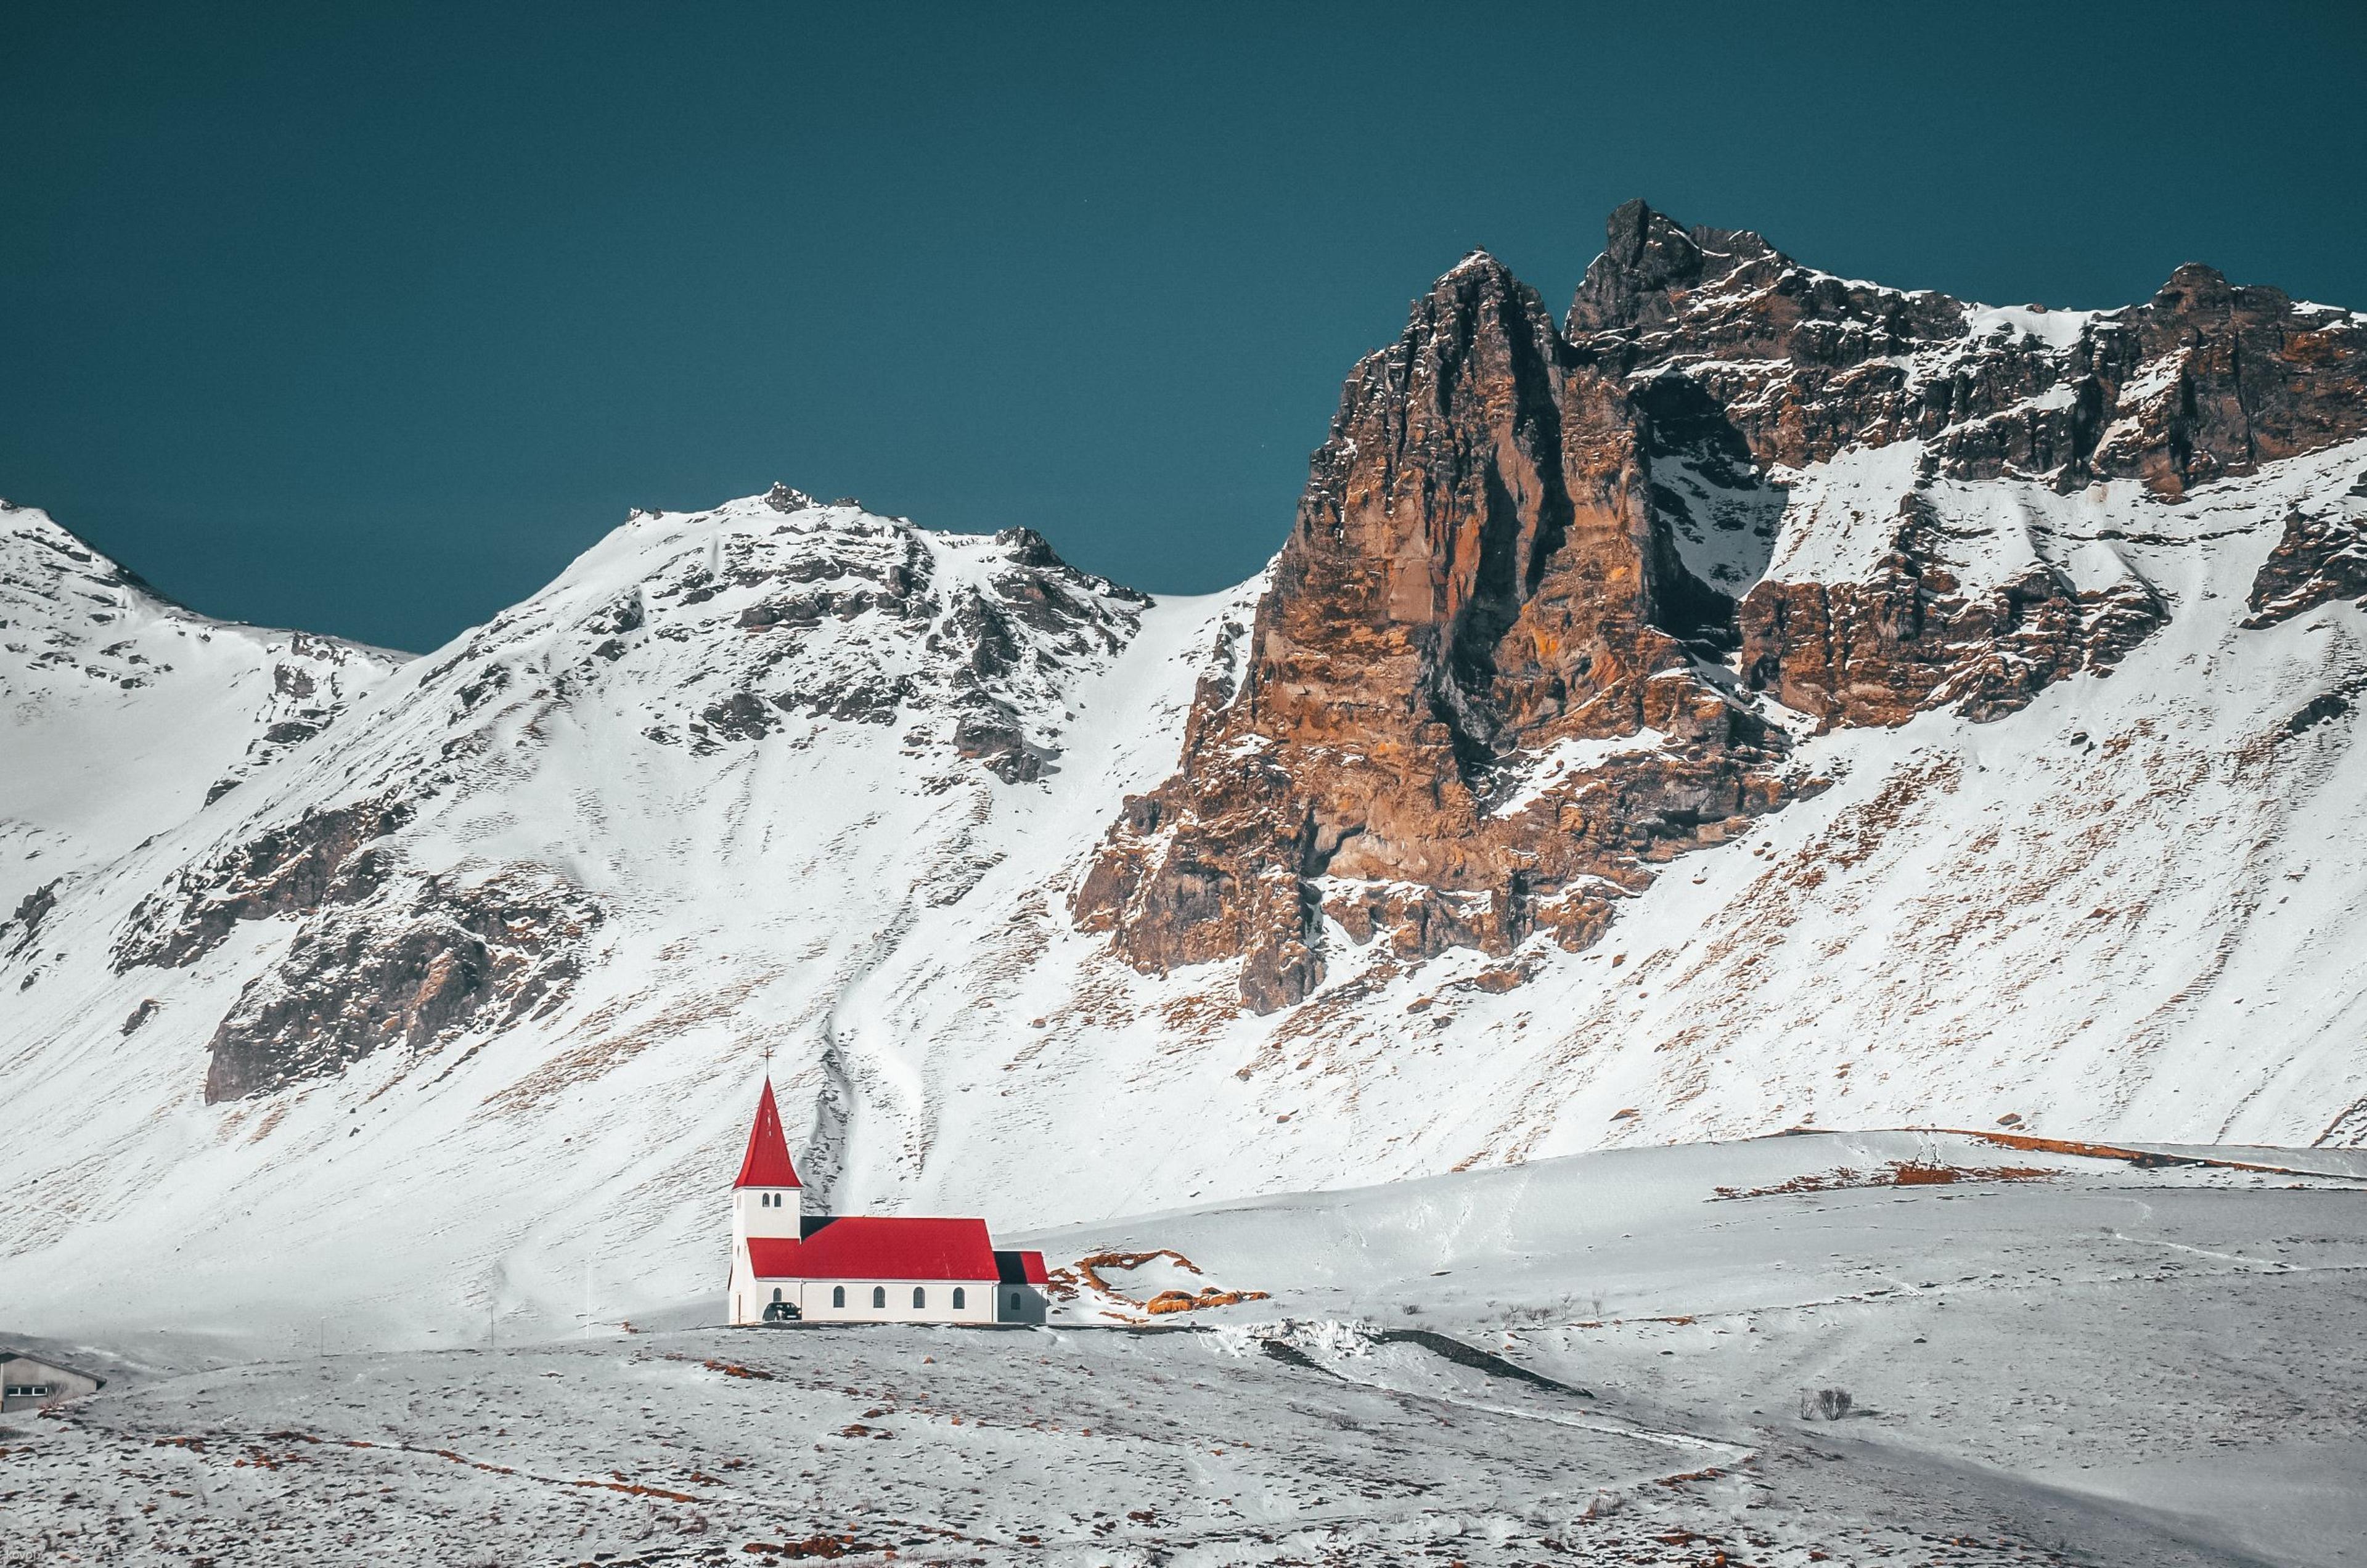 The red church of Vík during winter, set against a backdrop of brown mountains blanketed in snow.